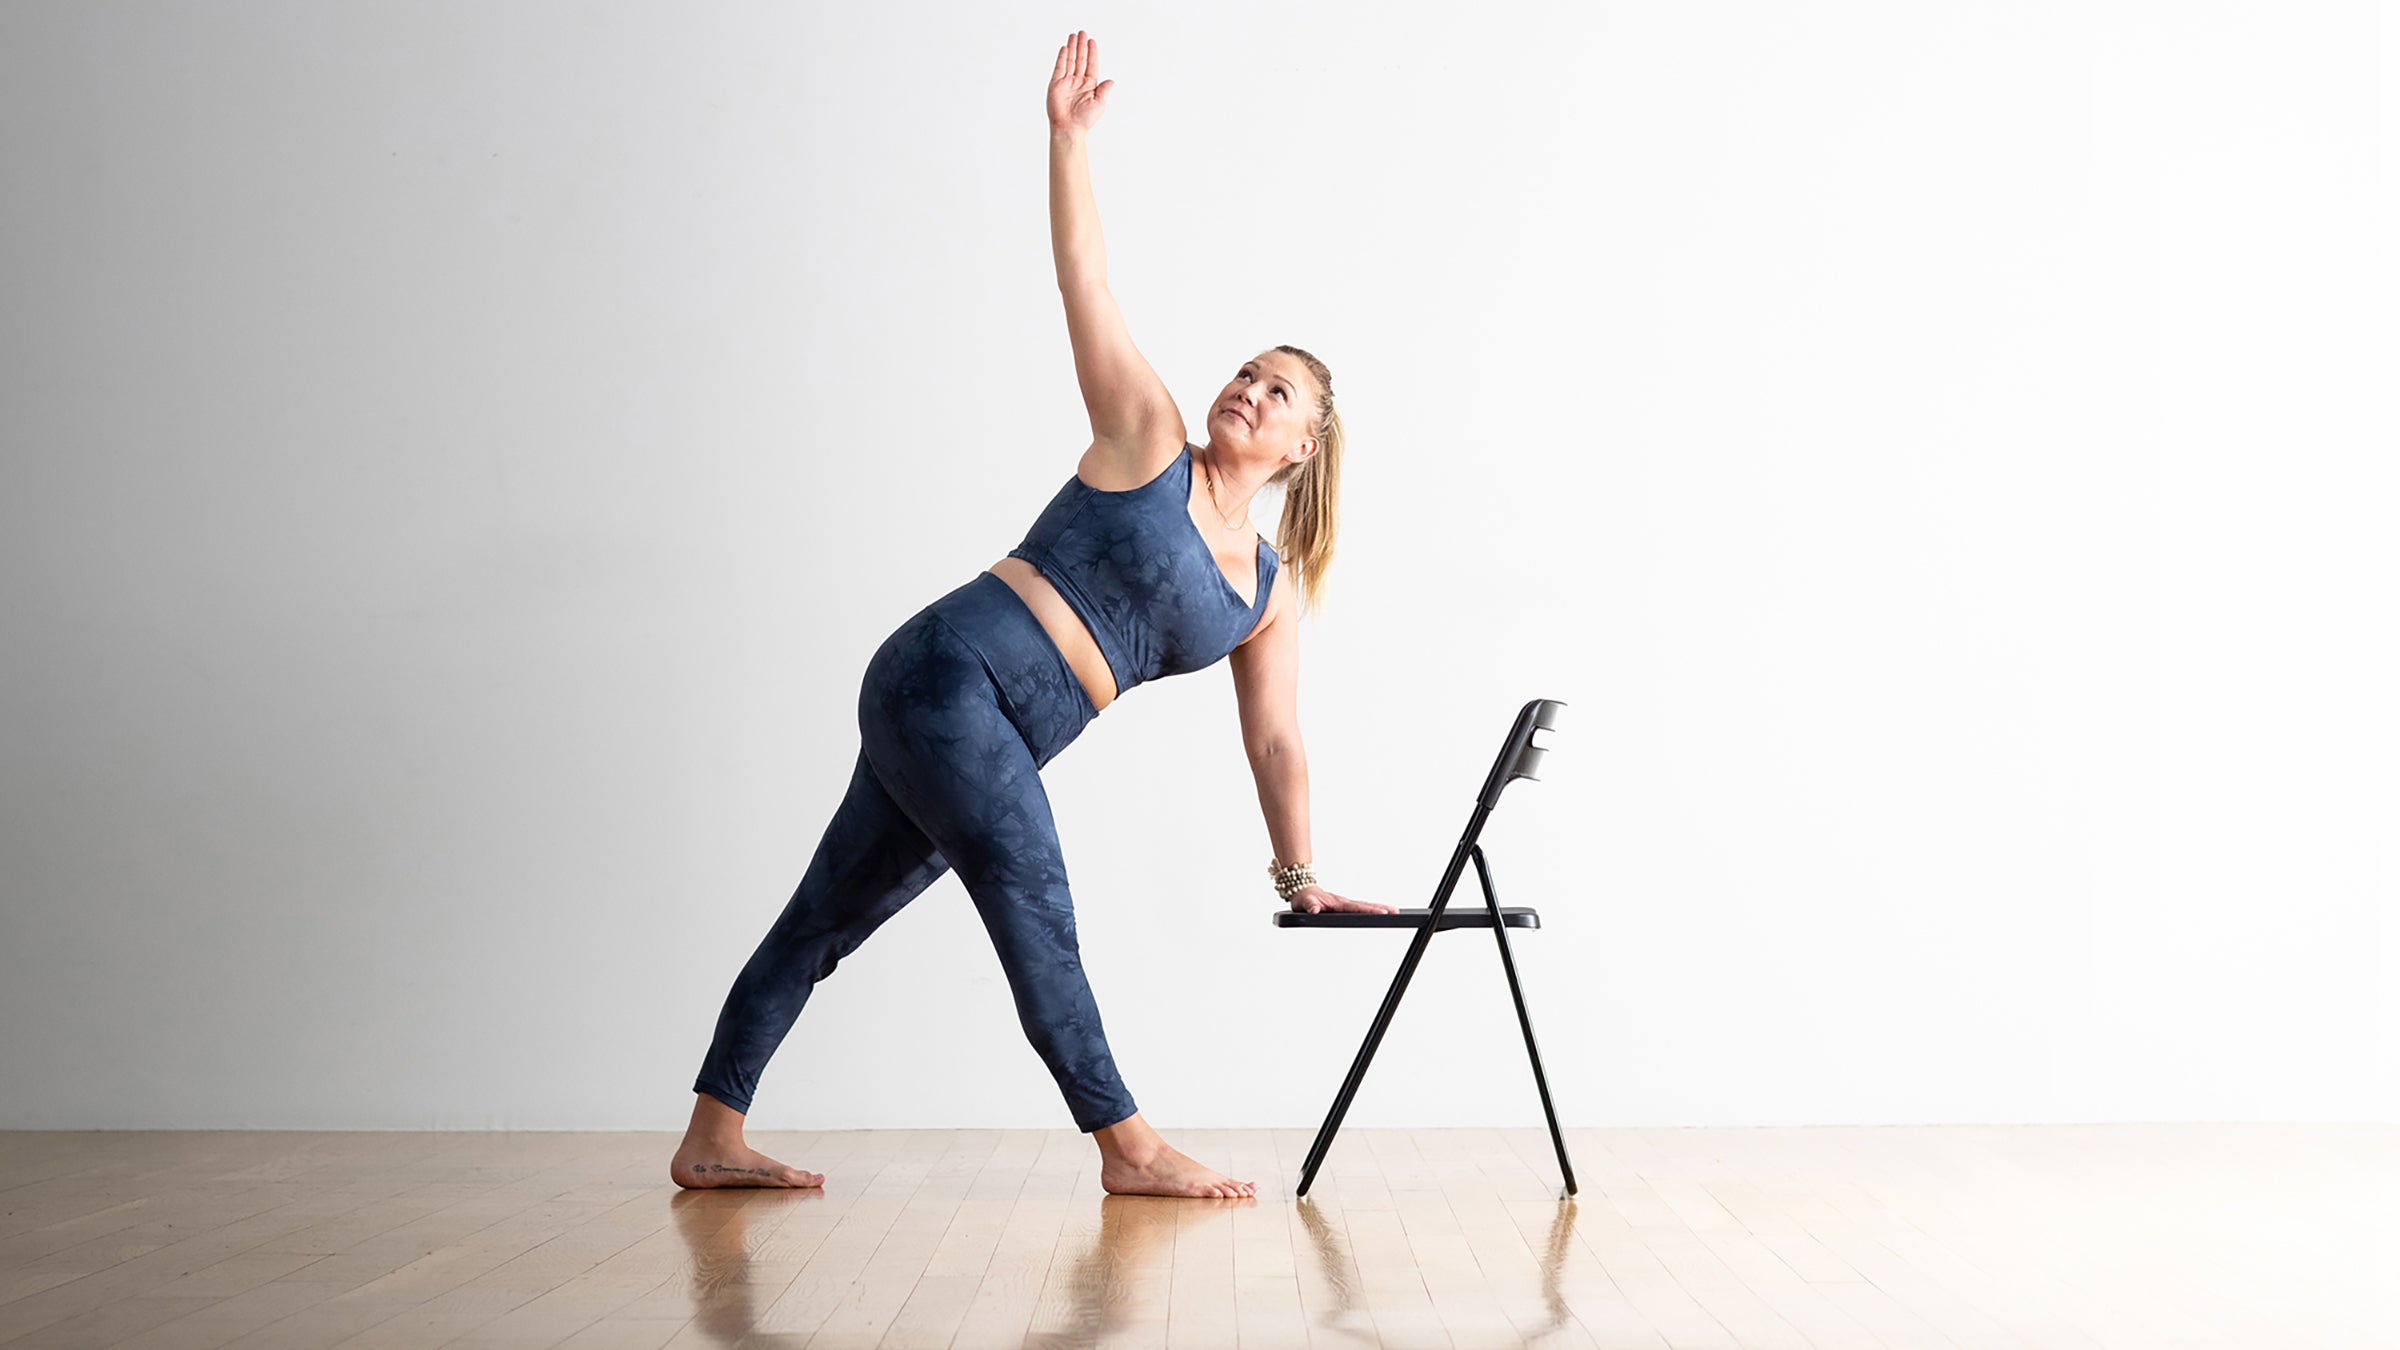 View, learn, and teach Revolved Chair Pose Variation at  https://www.tummee.com/yoga-poses/revolved-chair-pose/variations (Search  